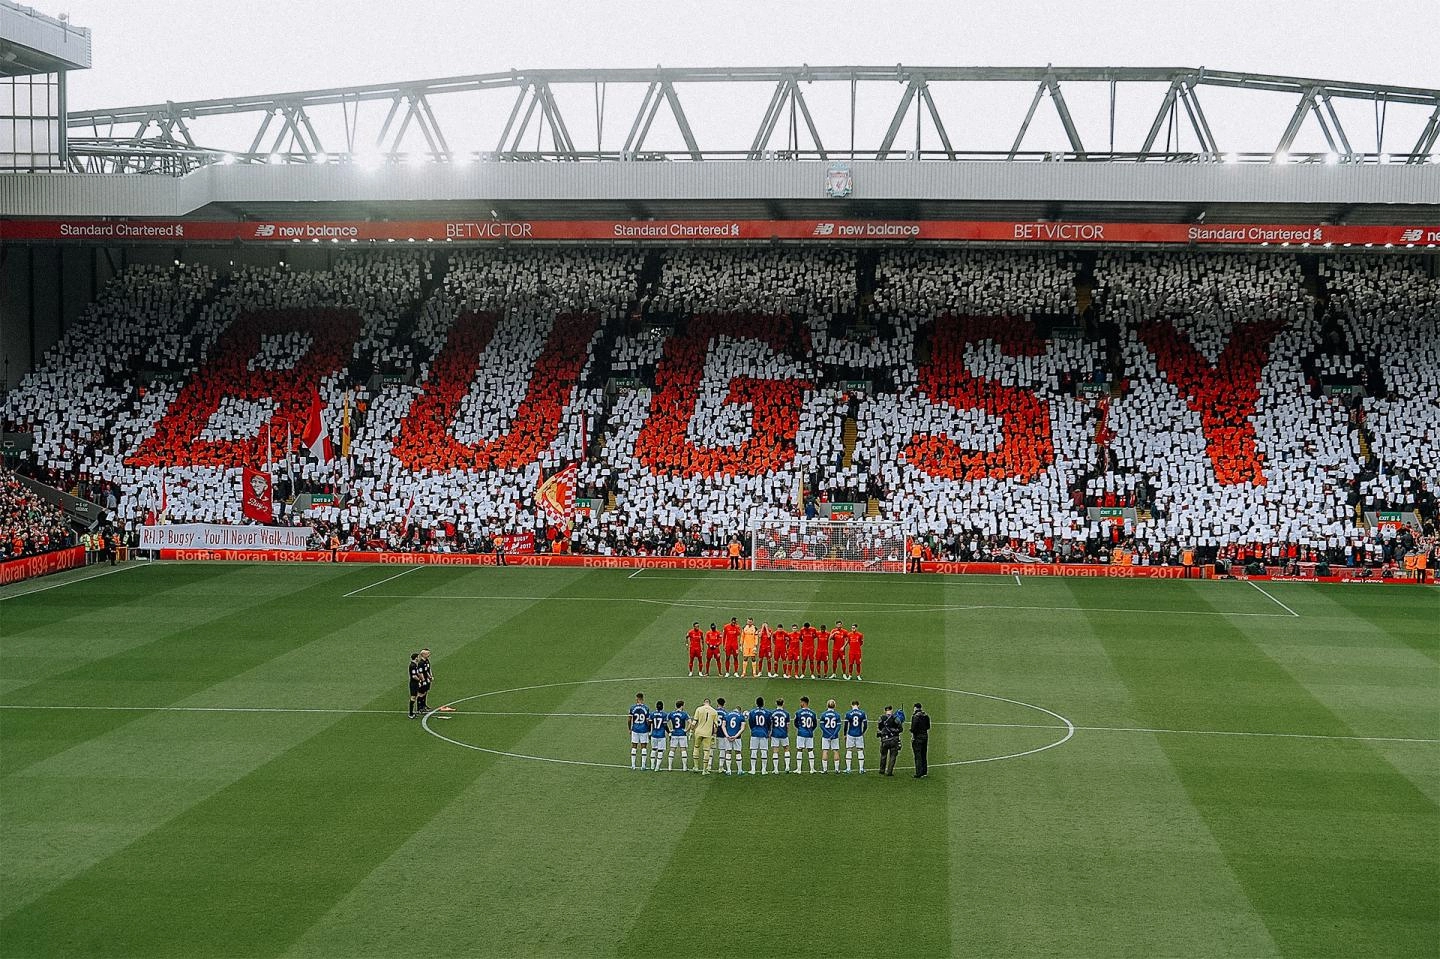 Anfield remembers Moran after his death in 2017